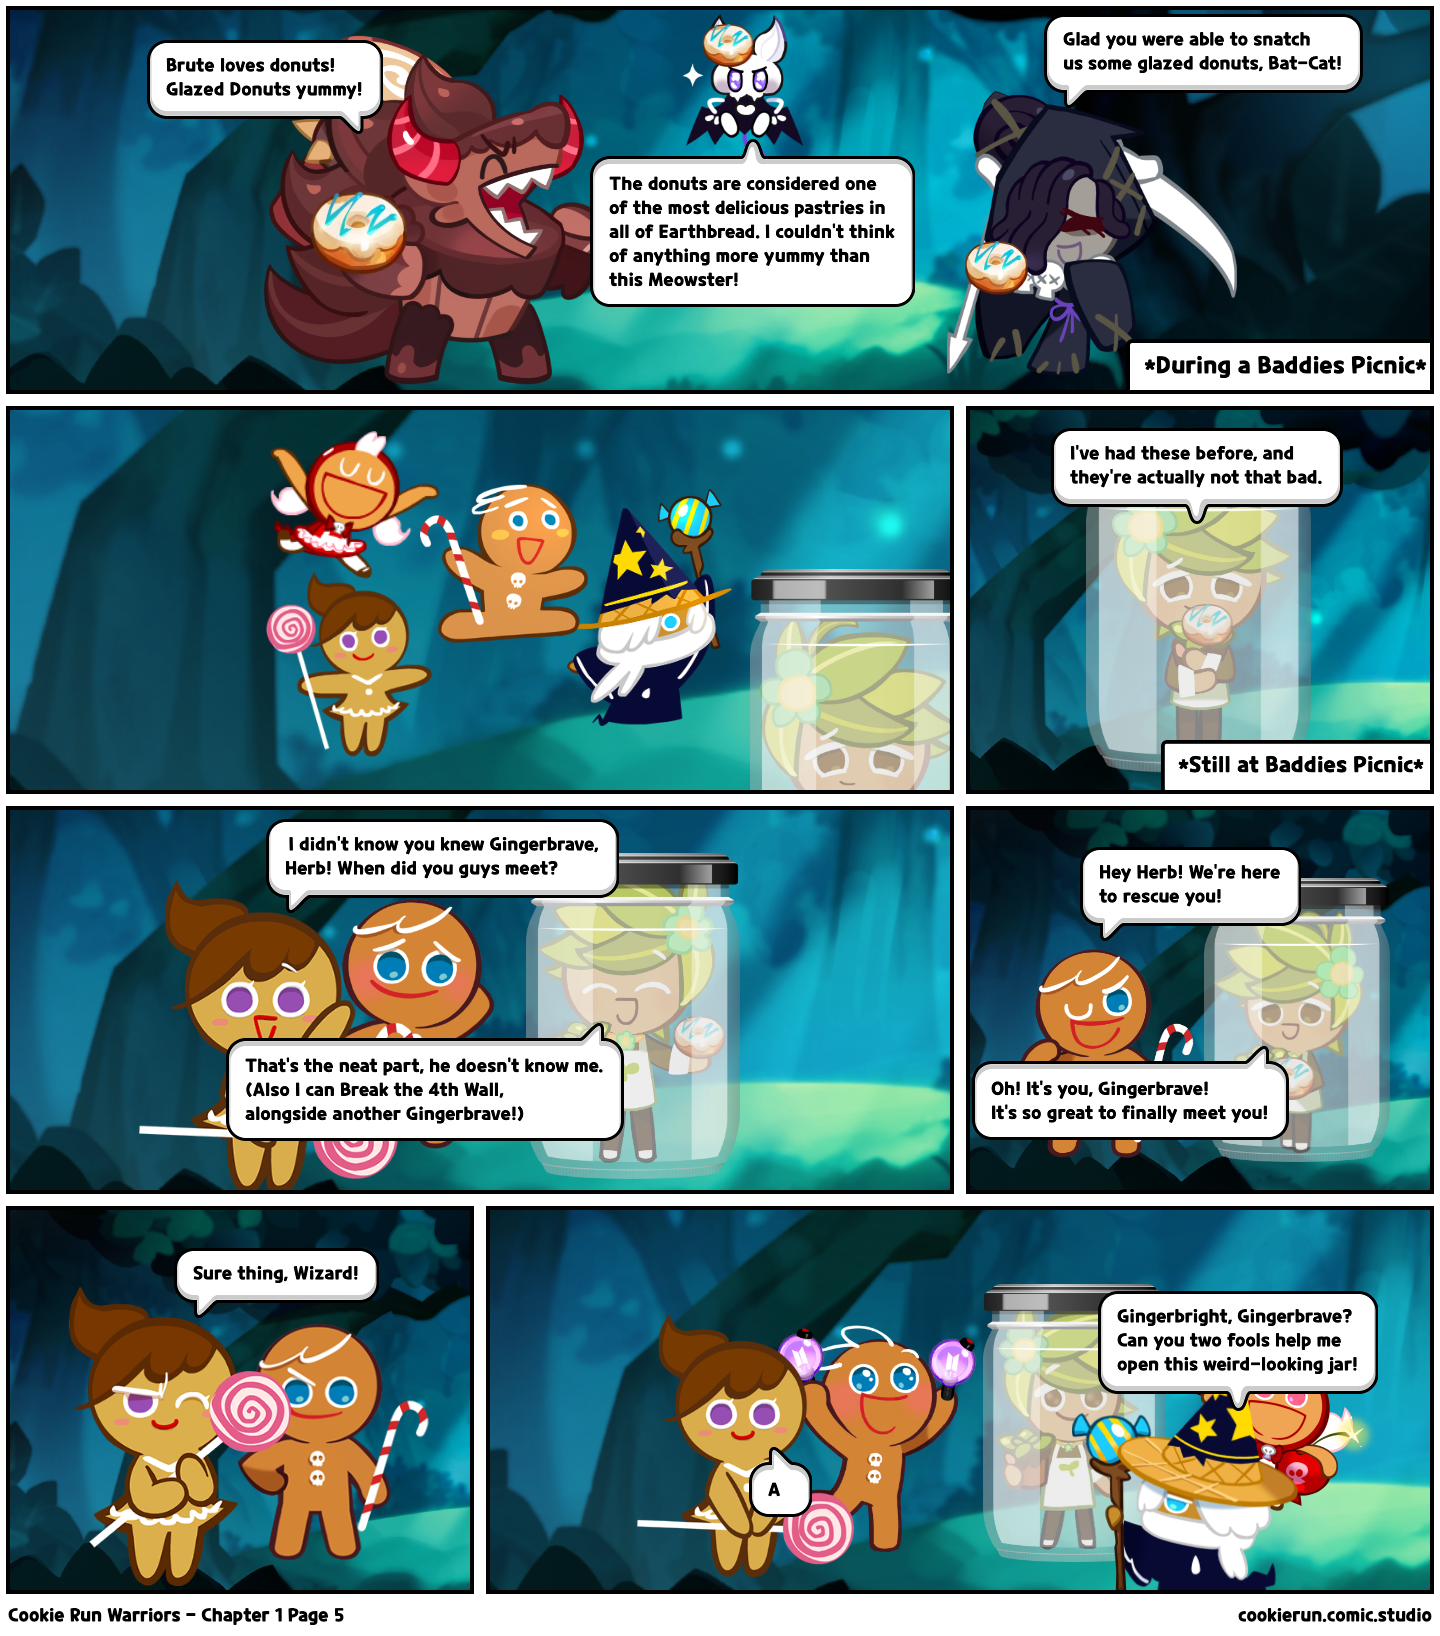 Cookie Run Warriors - Chapter 1 Page 5